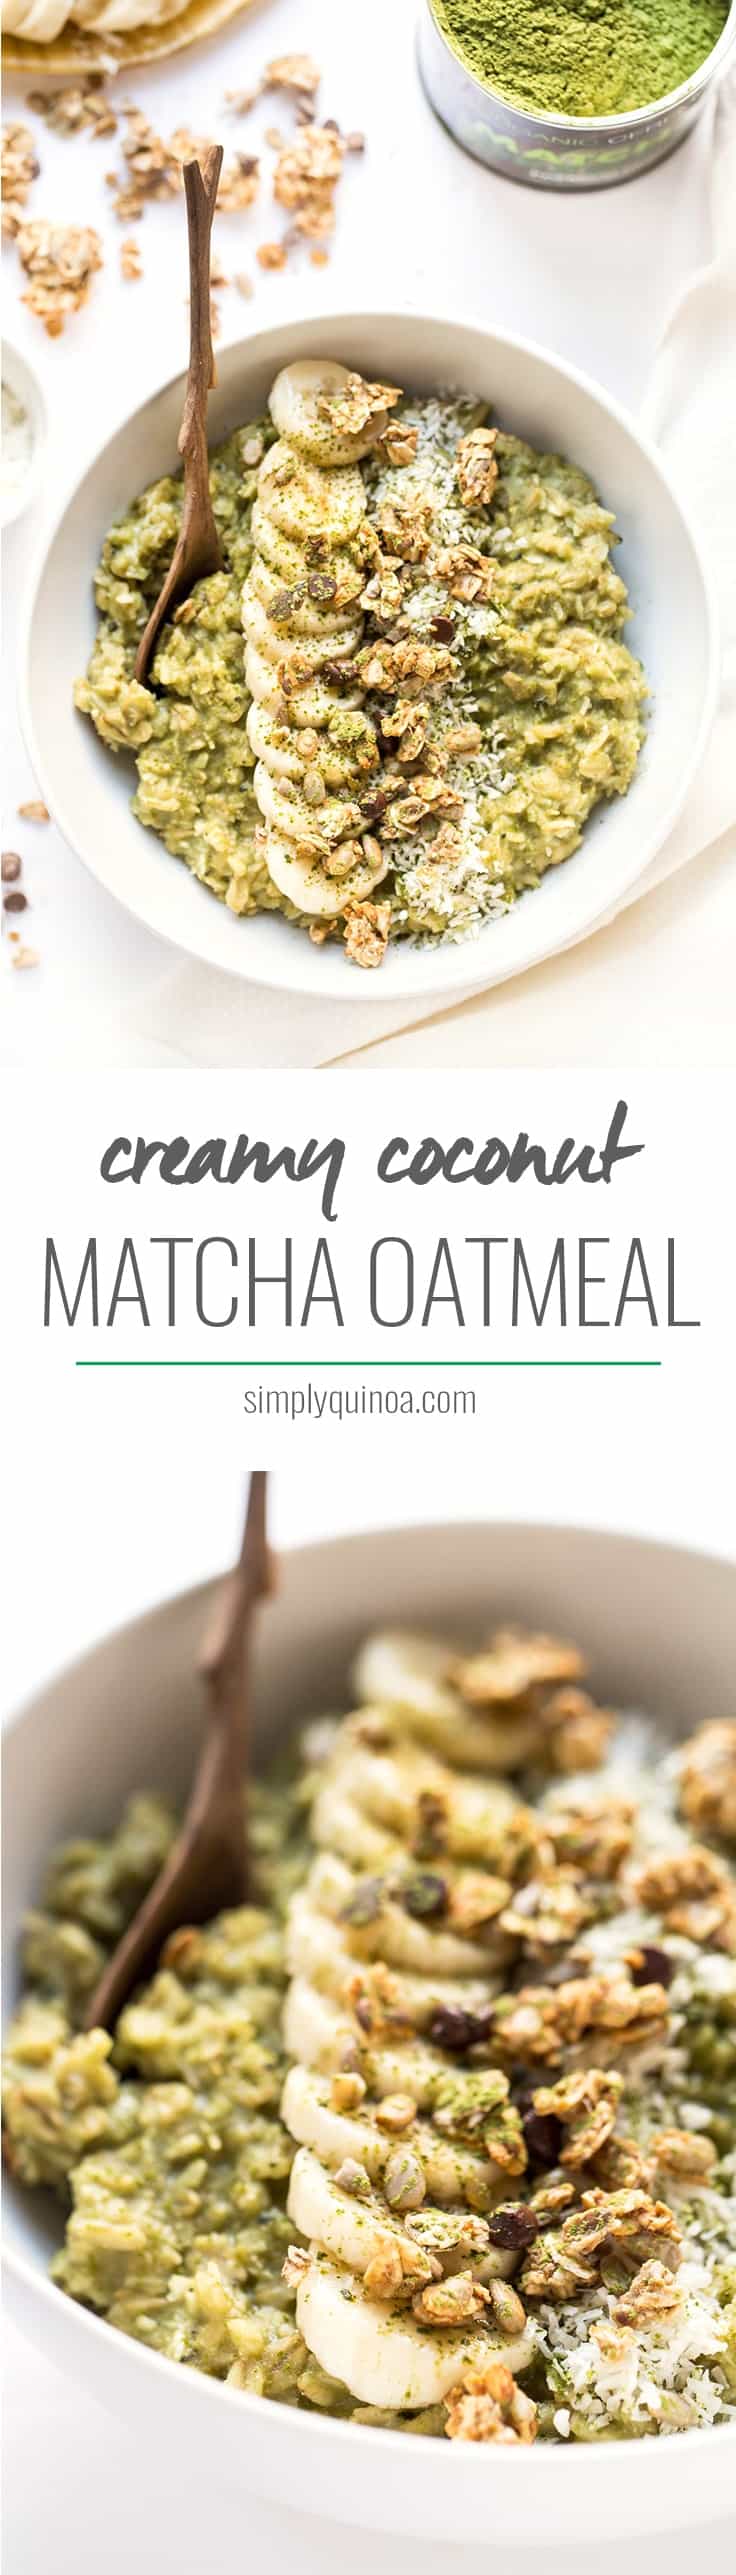 These Creamy Coconut Matcha Oatmeal bowls are the perfect, warming breakfast! Packed with antioxidants and fiber, it's the perfect way to start your day!